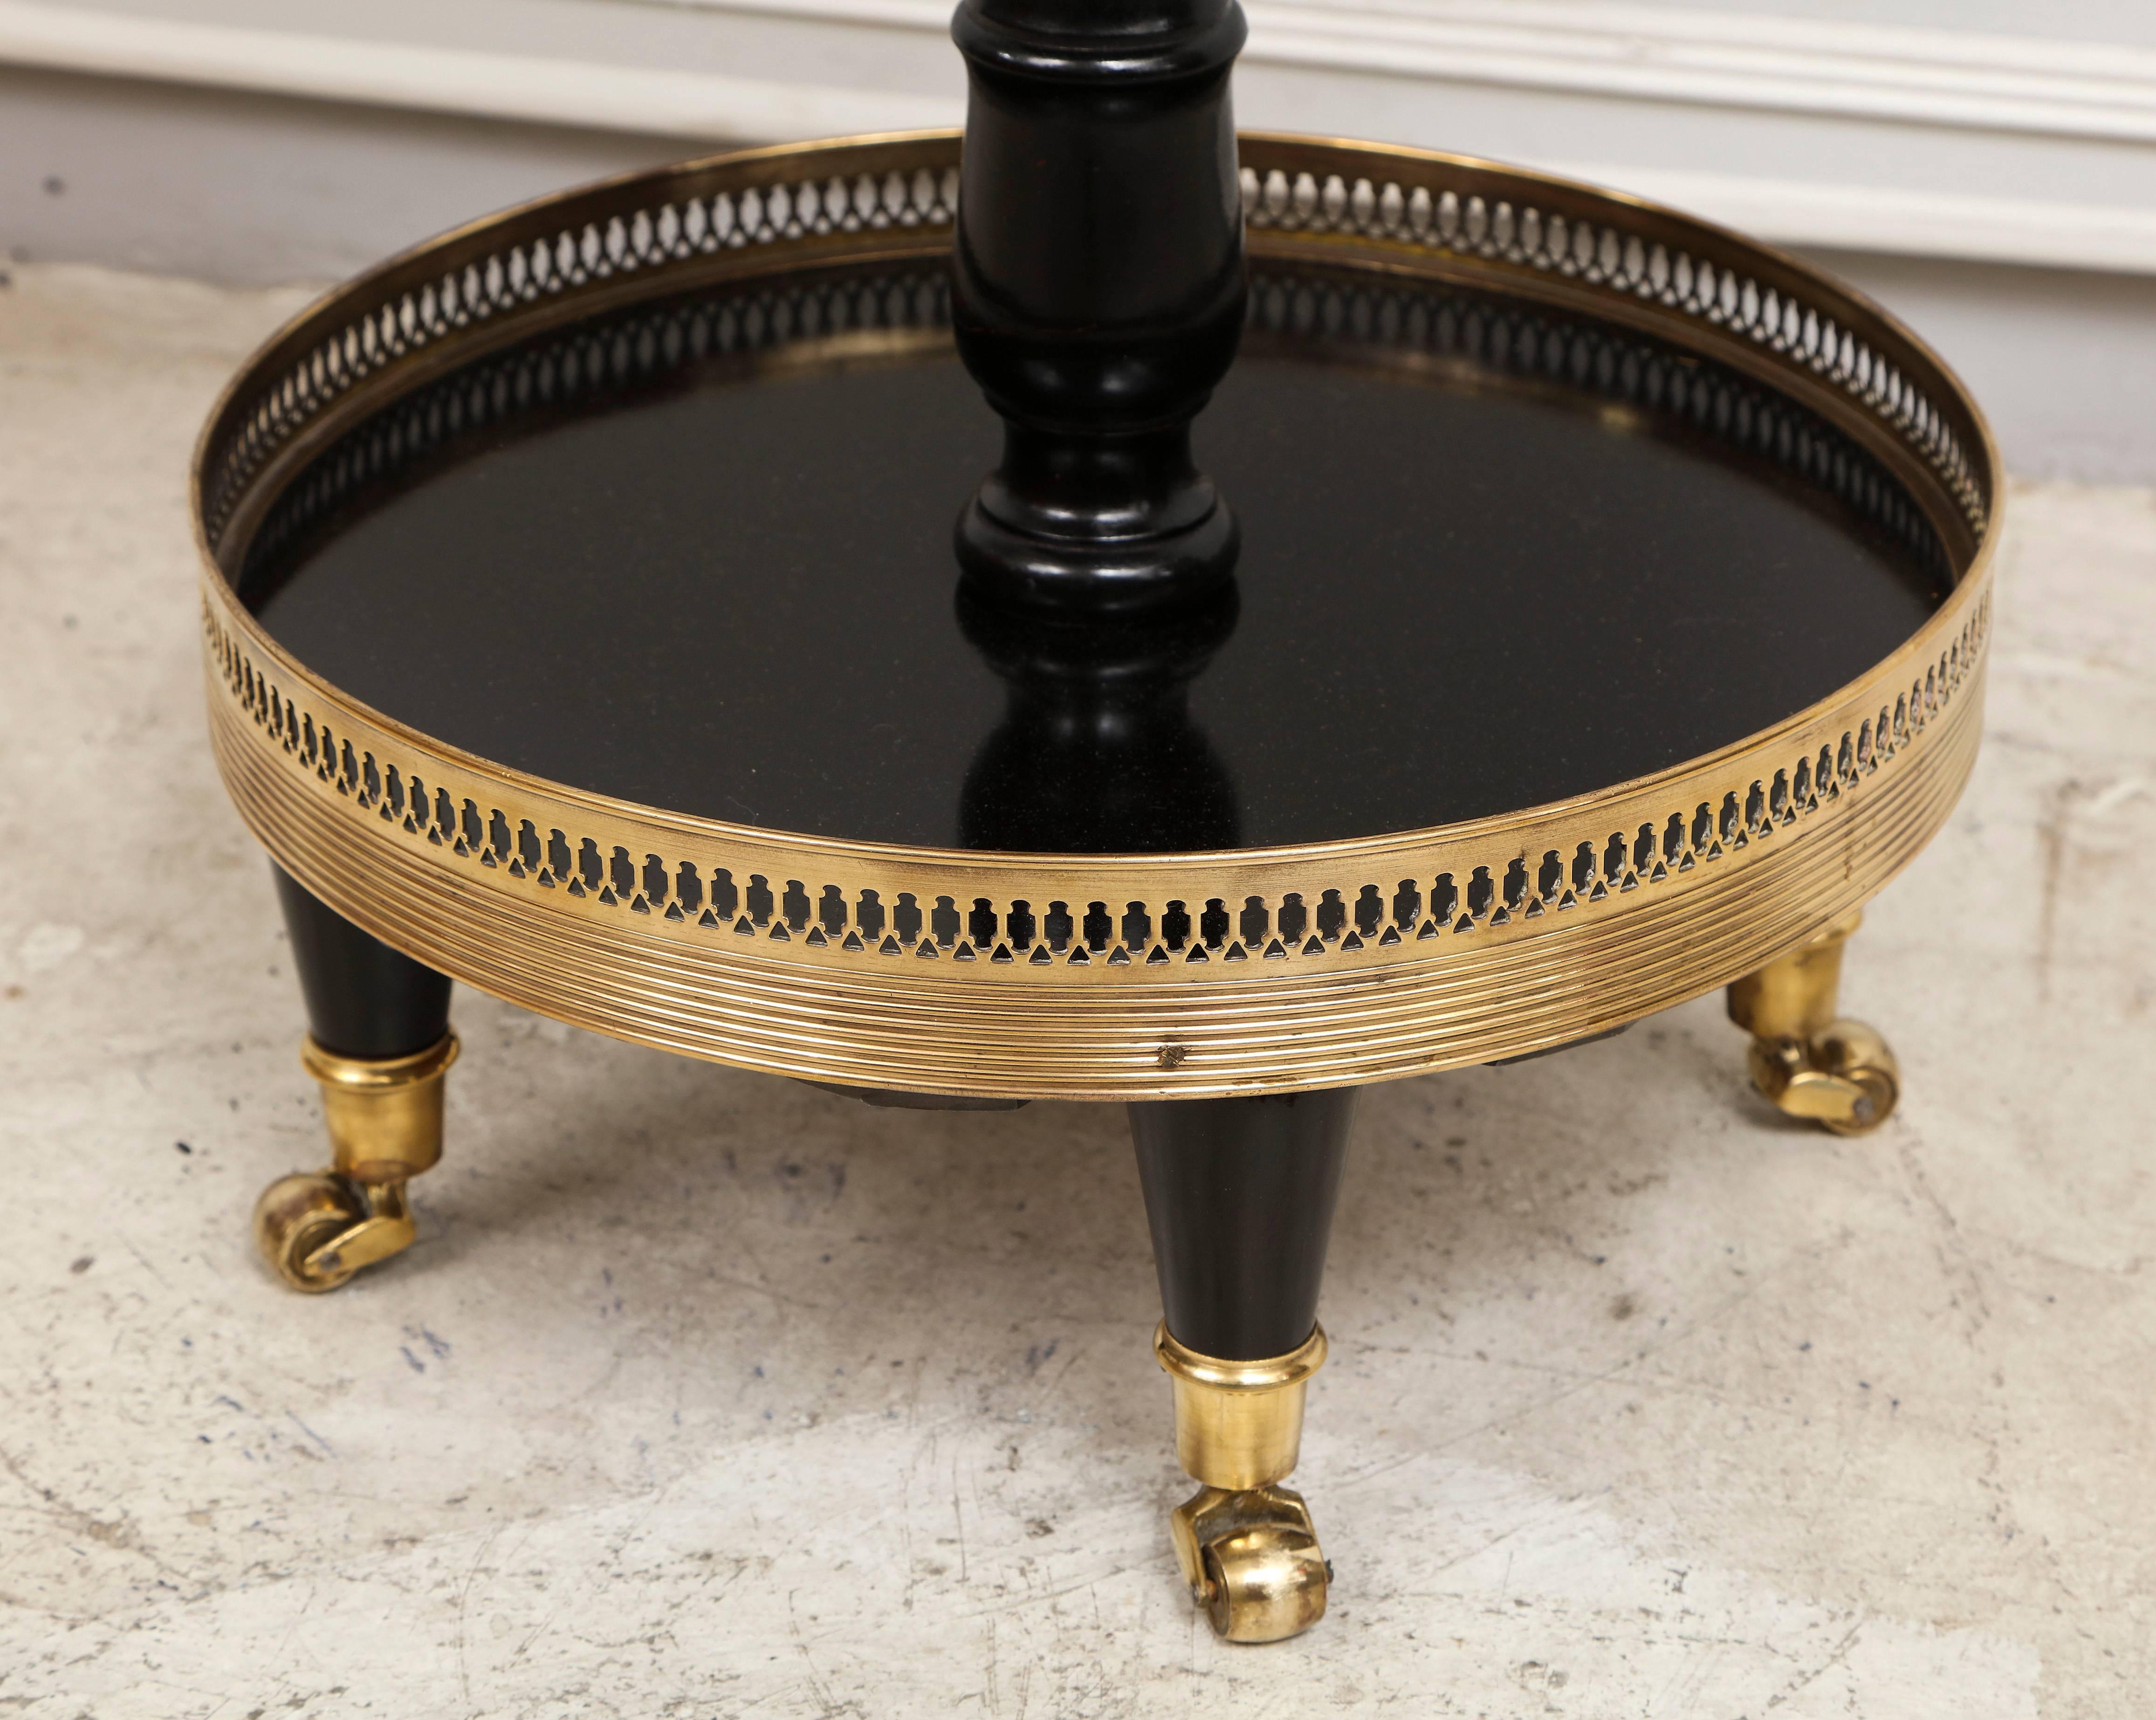 French Regency Style End Table with Brass Gallery on Brass Sabots